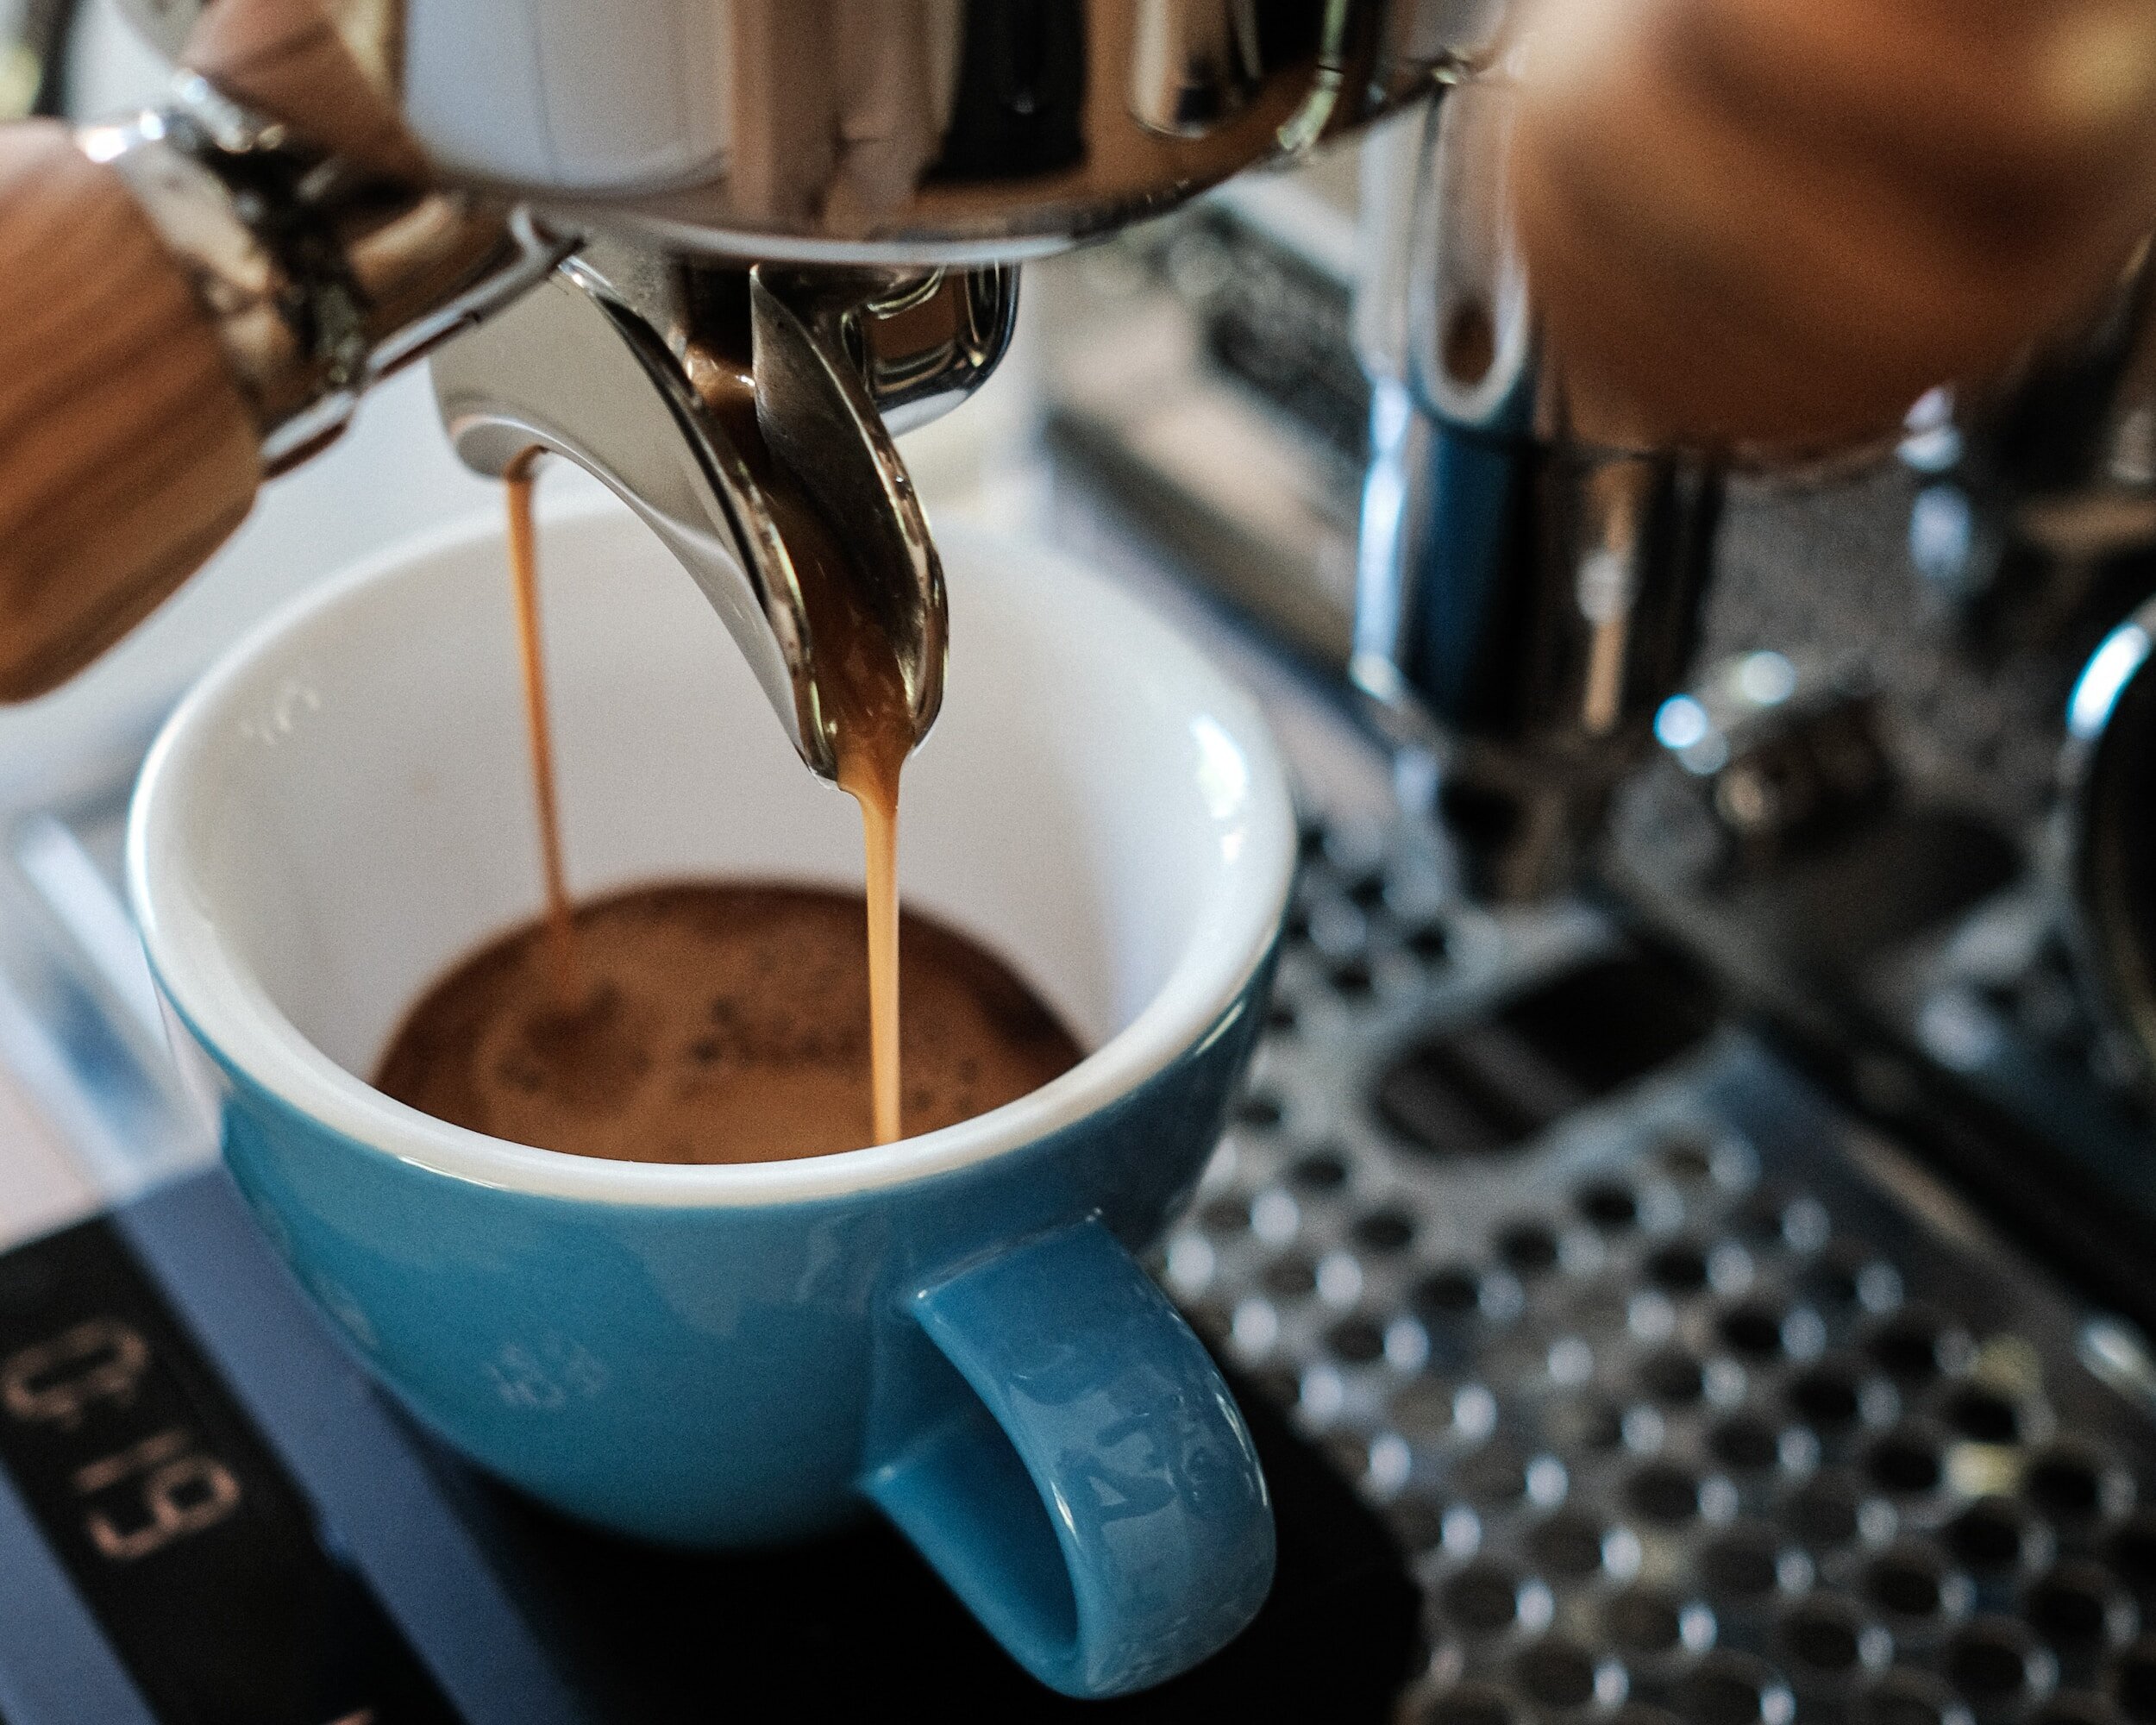 The Best Coffee Machines: What Coffee Machine Should I Use in My Cafe?